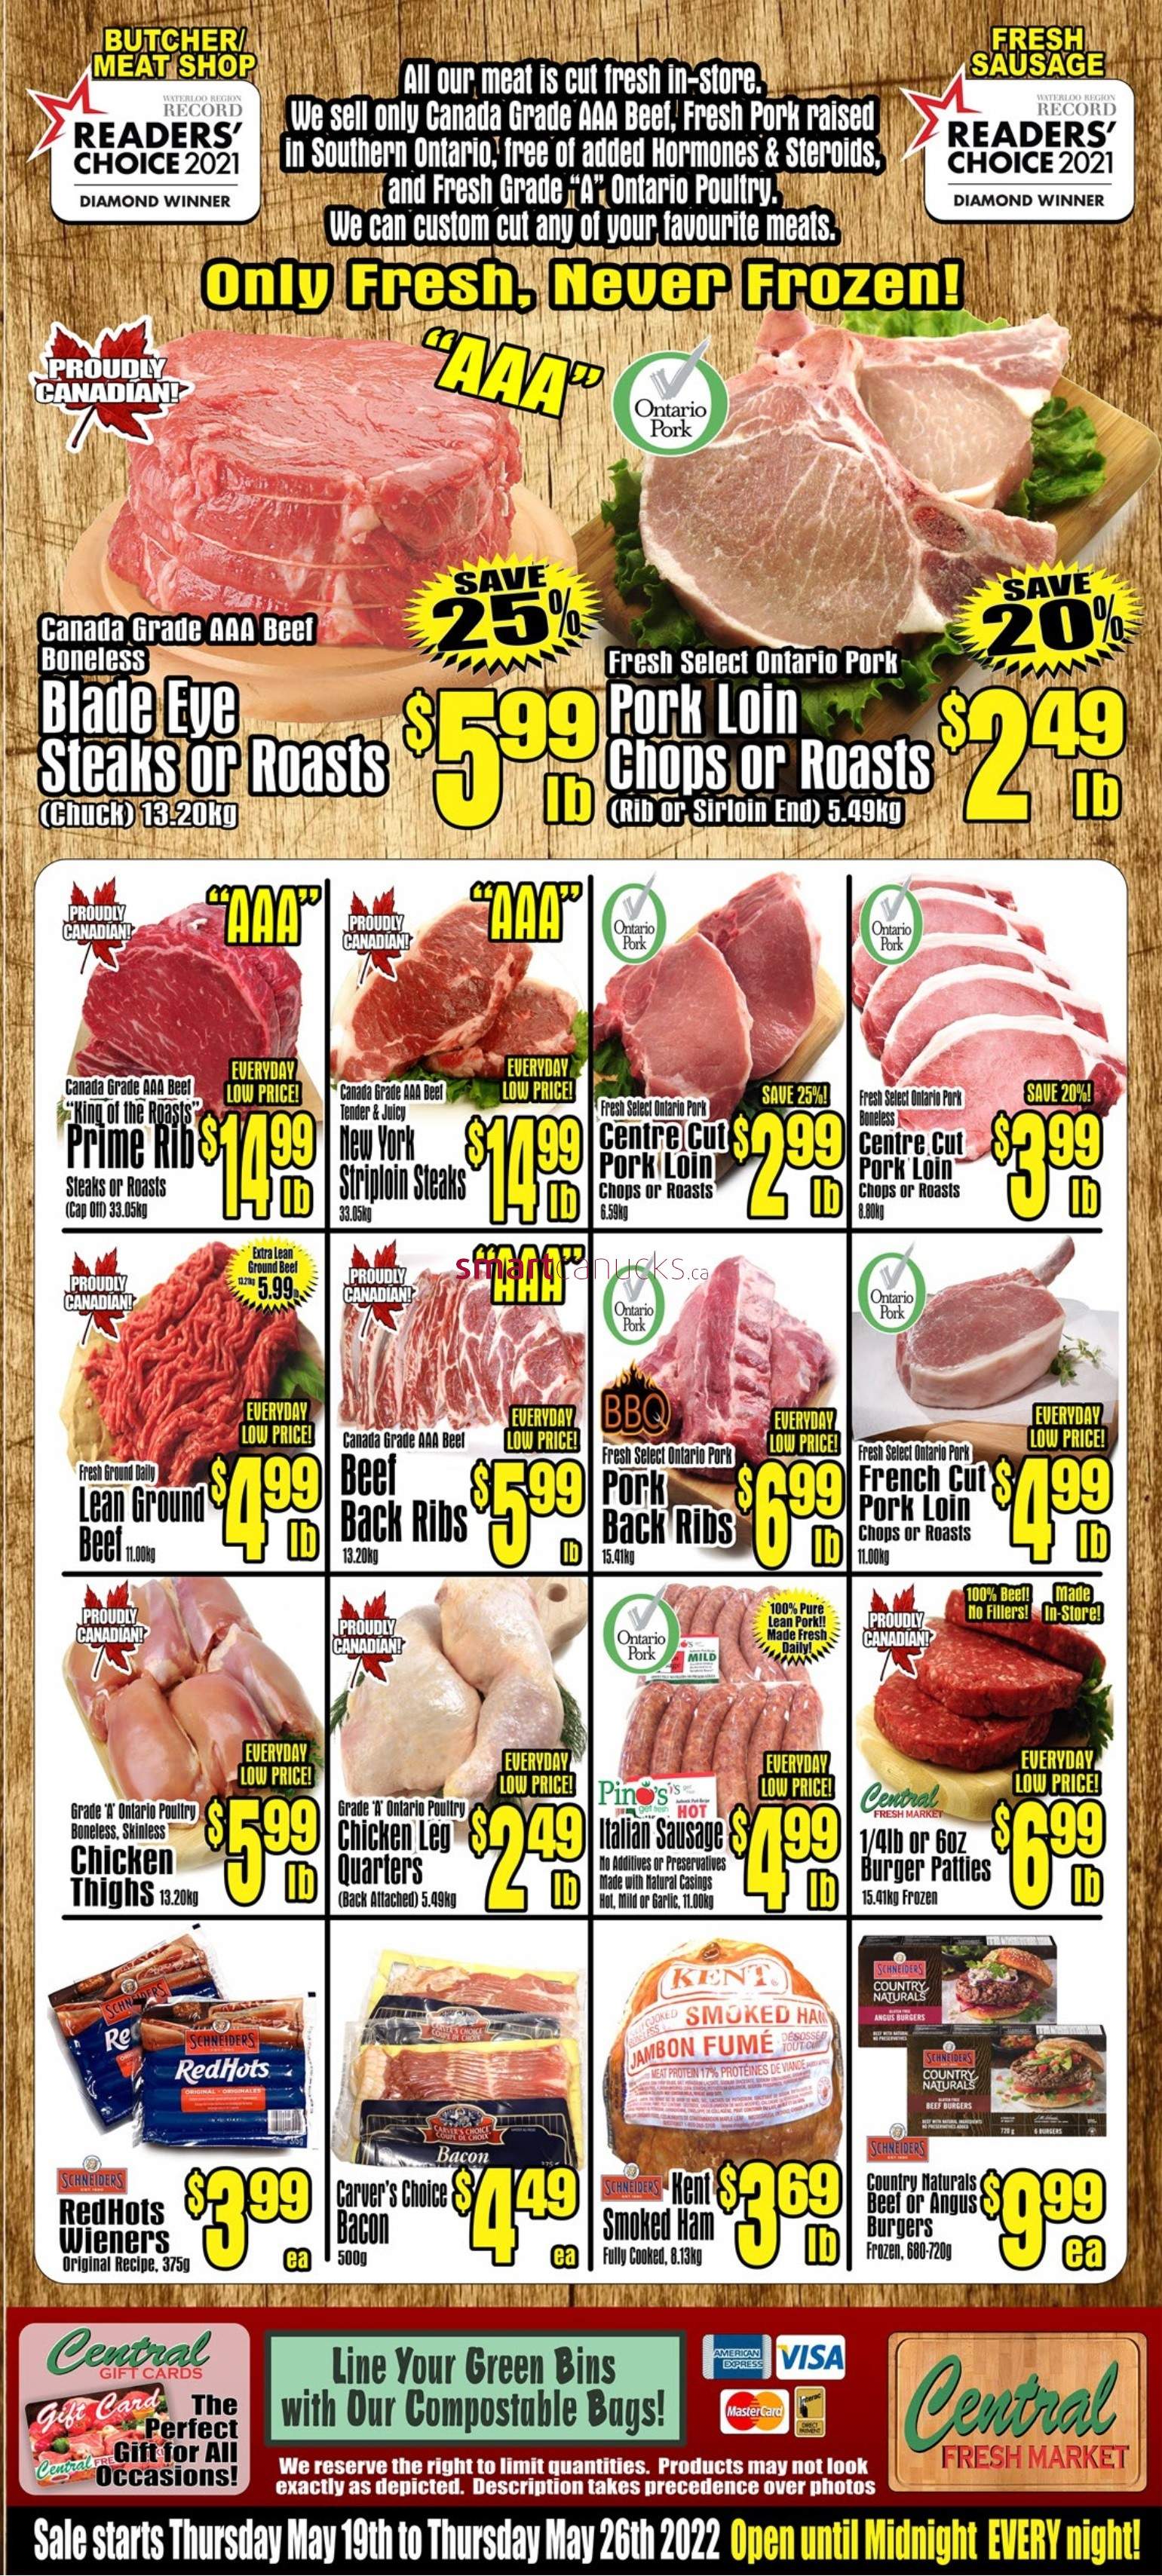 Central Fresh Market Flyer May 19 To 263 3 